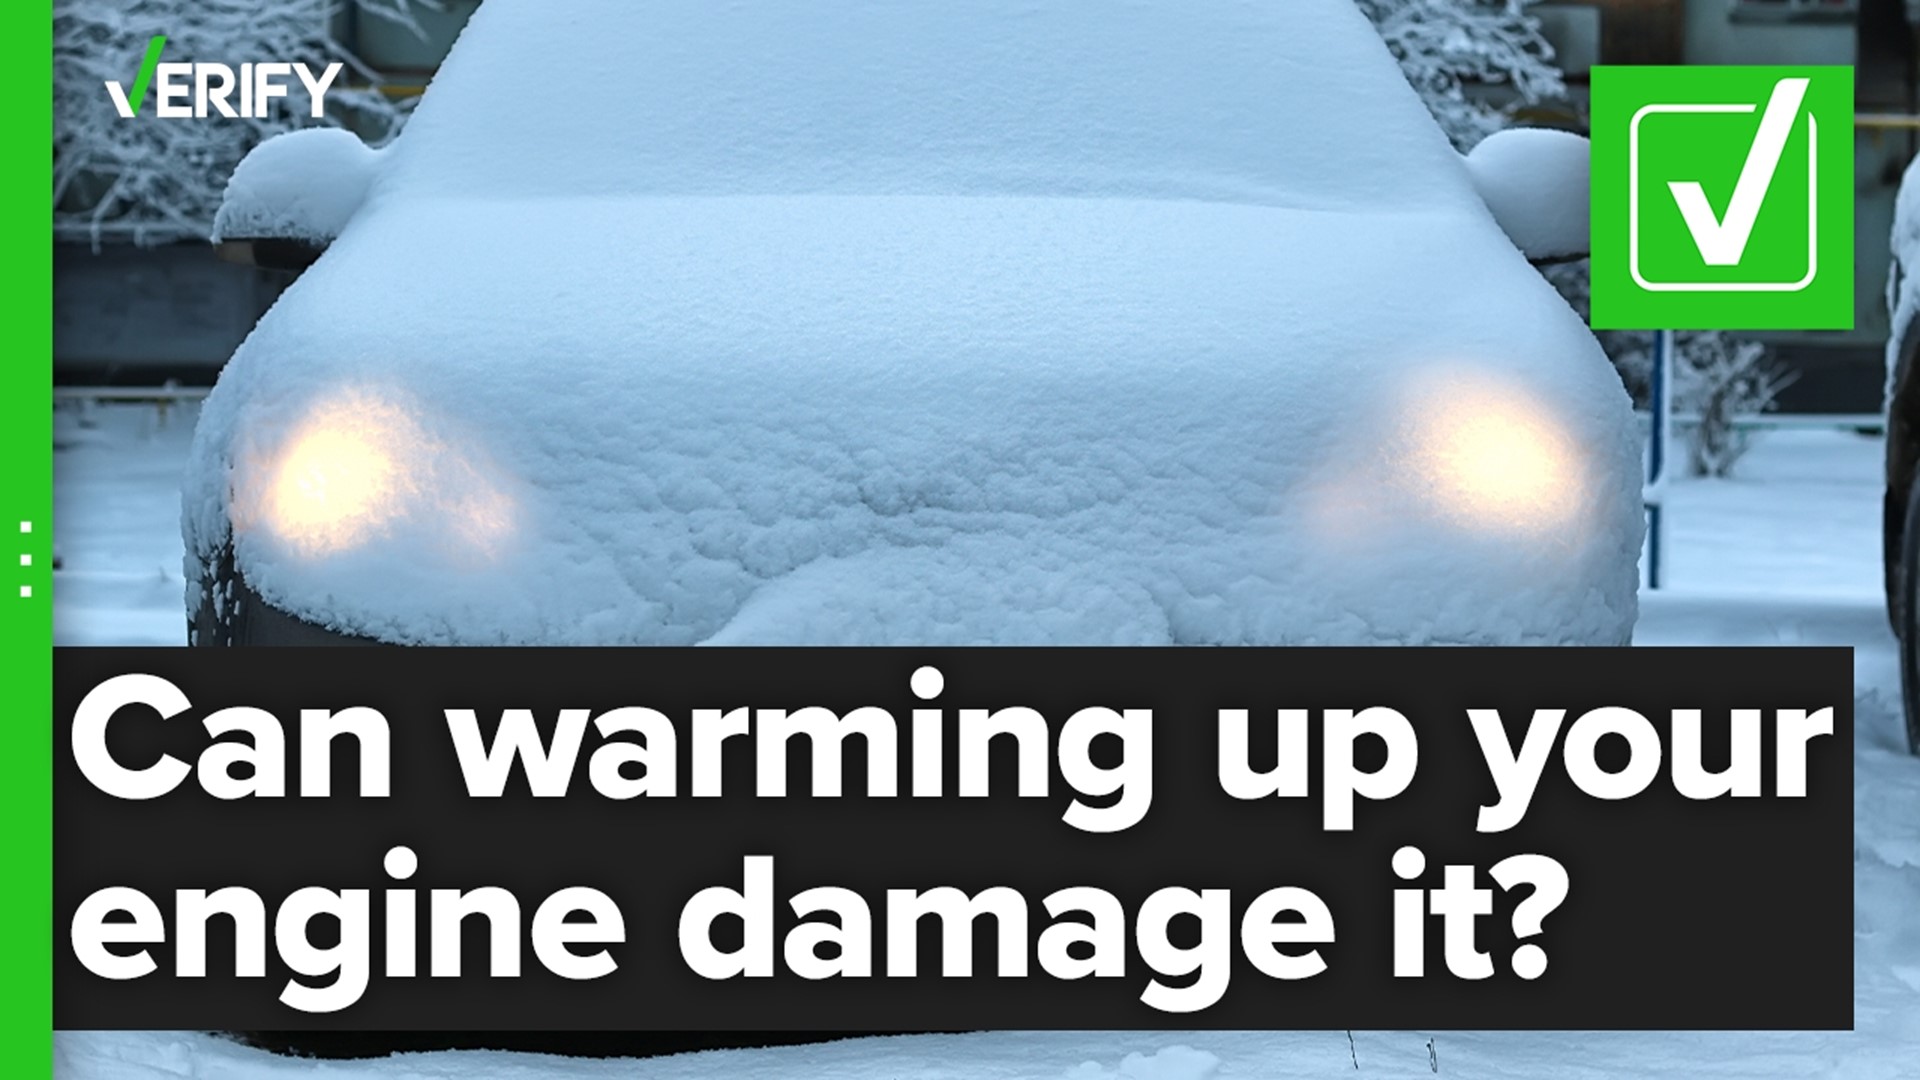 Warming up your gas car in the winter can damage your engine's pistons and cylinders. It can also decrease your vehicle’s fuel efficiency and hurt the environment.